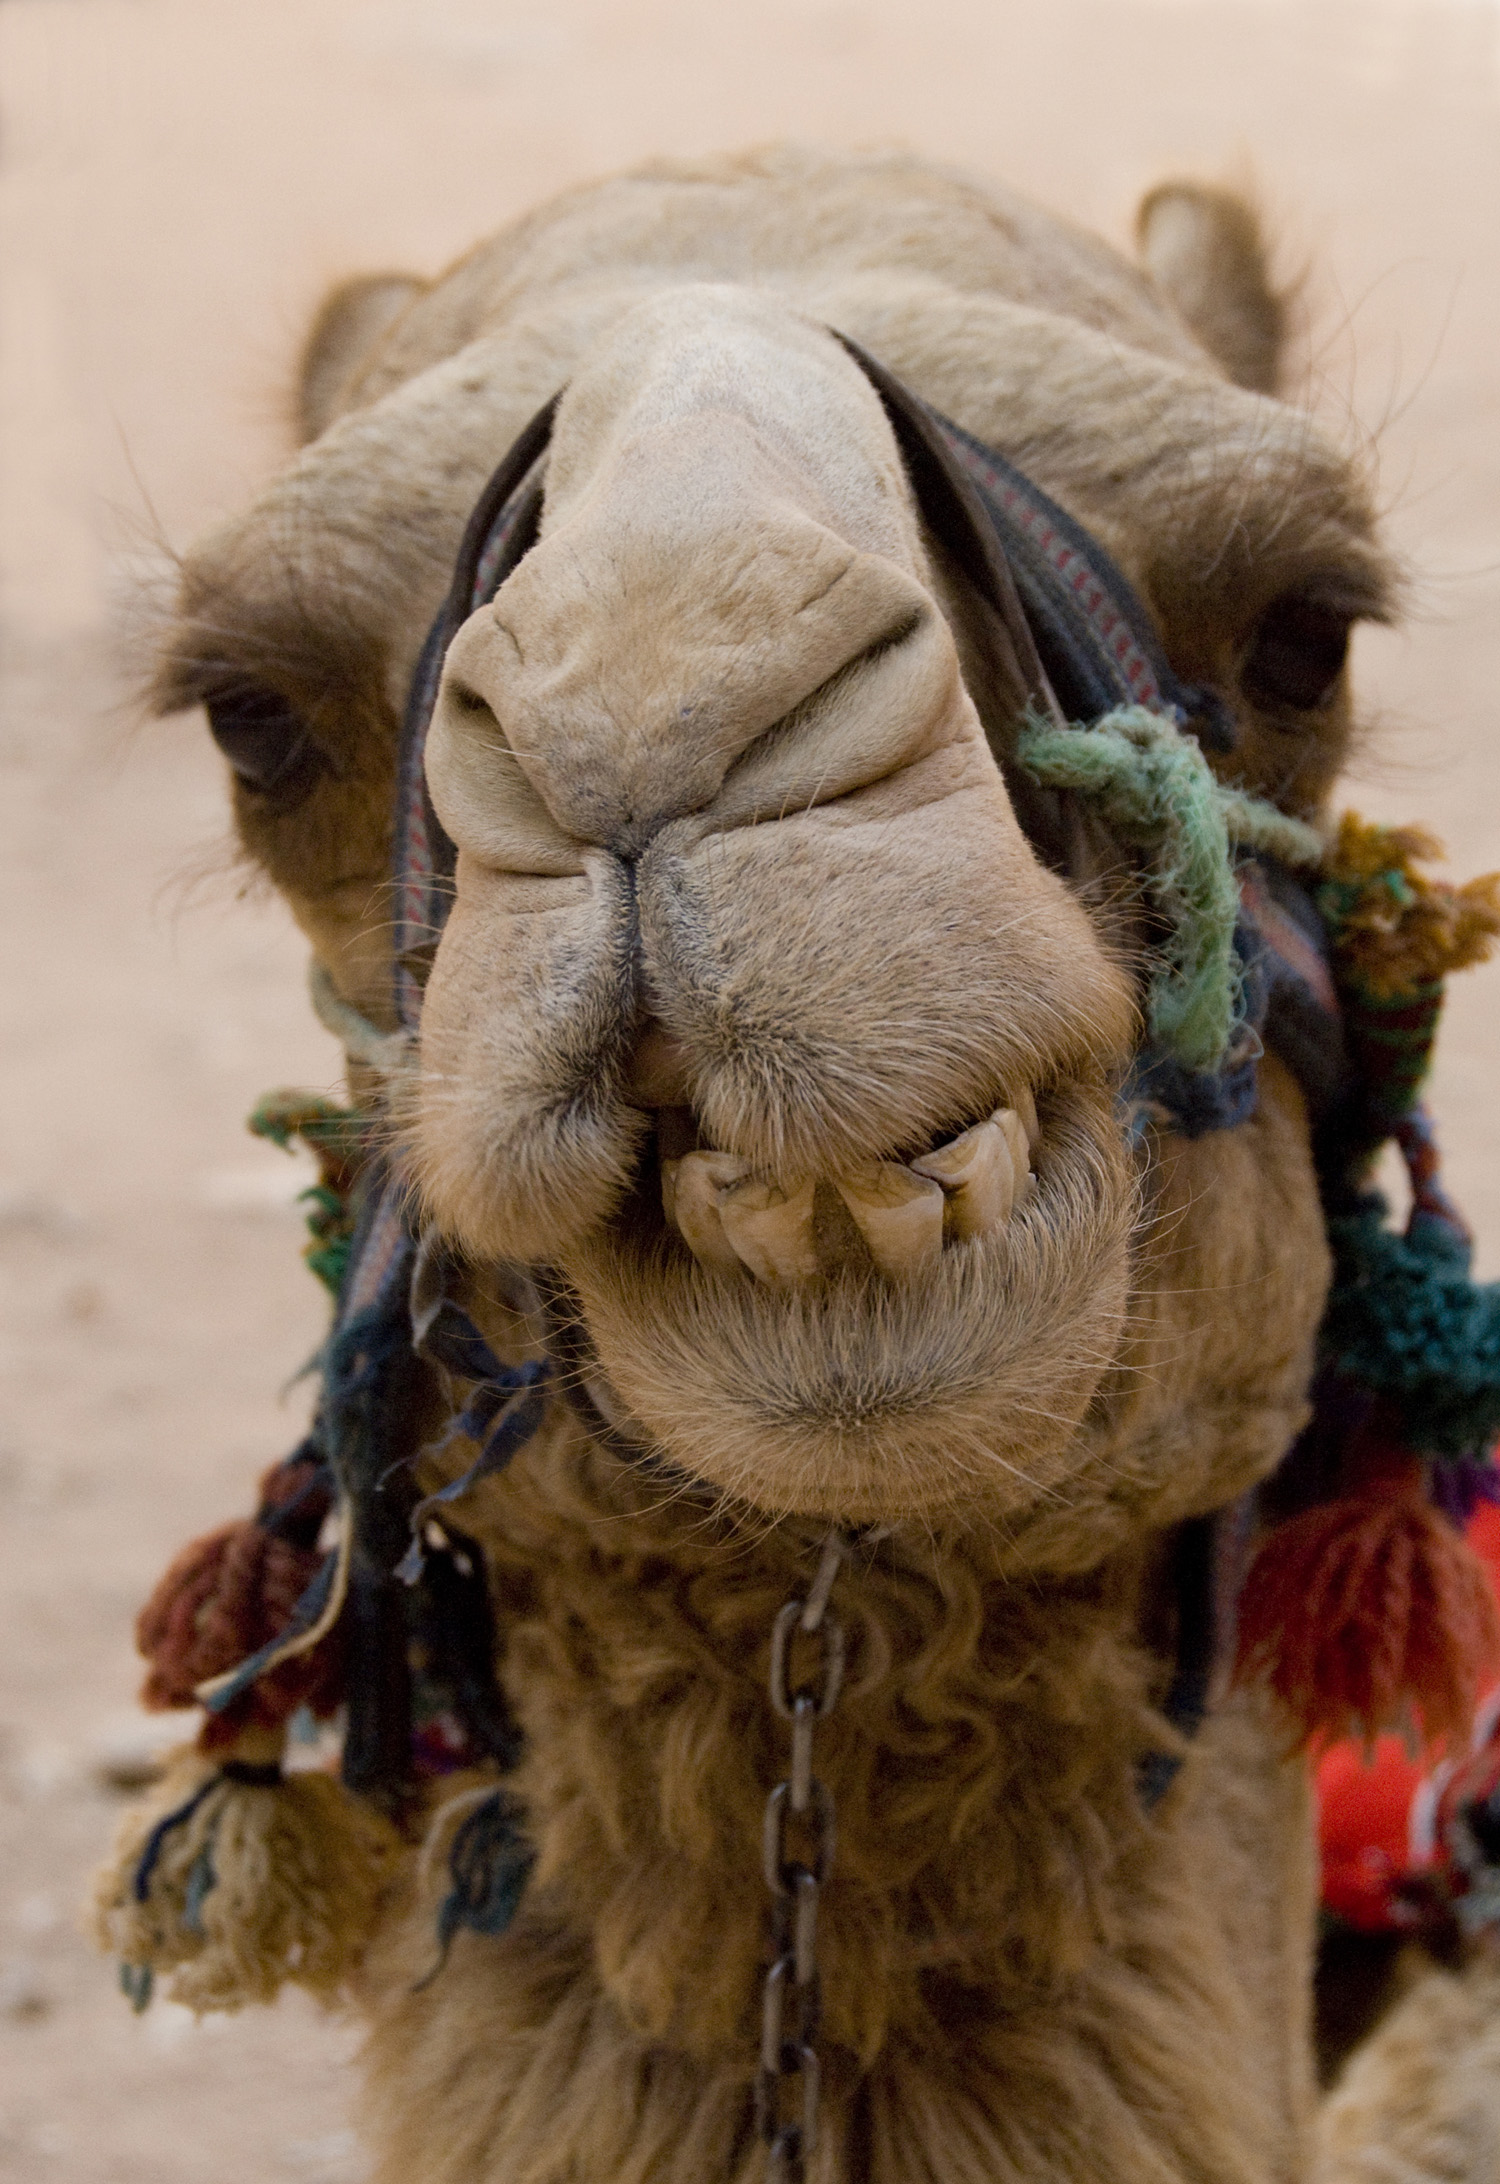 A local camel in the Siq, Ancient Nabataean city of Petra, Jordan. Image © Cindy Miller Hopkins